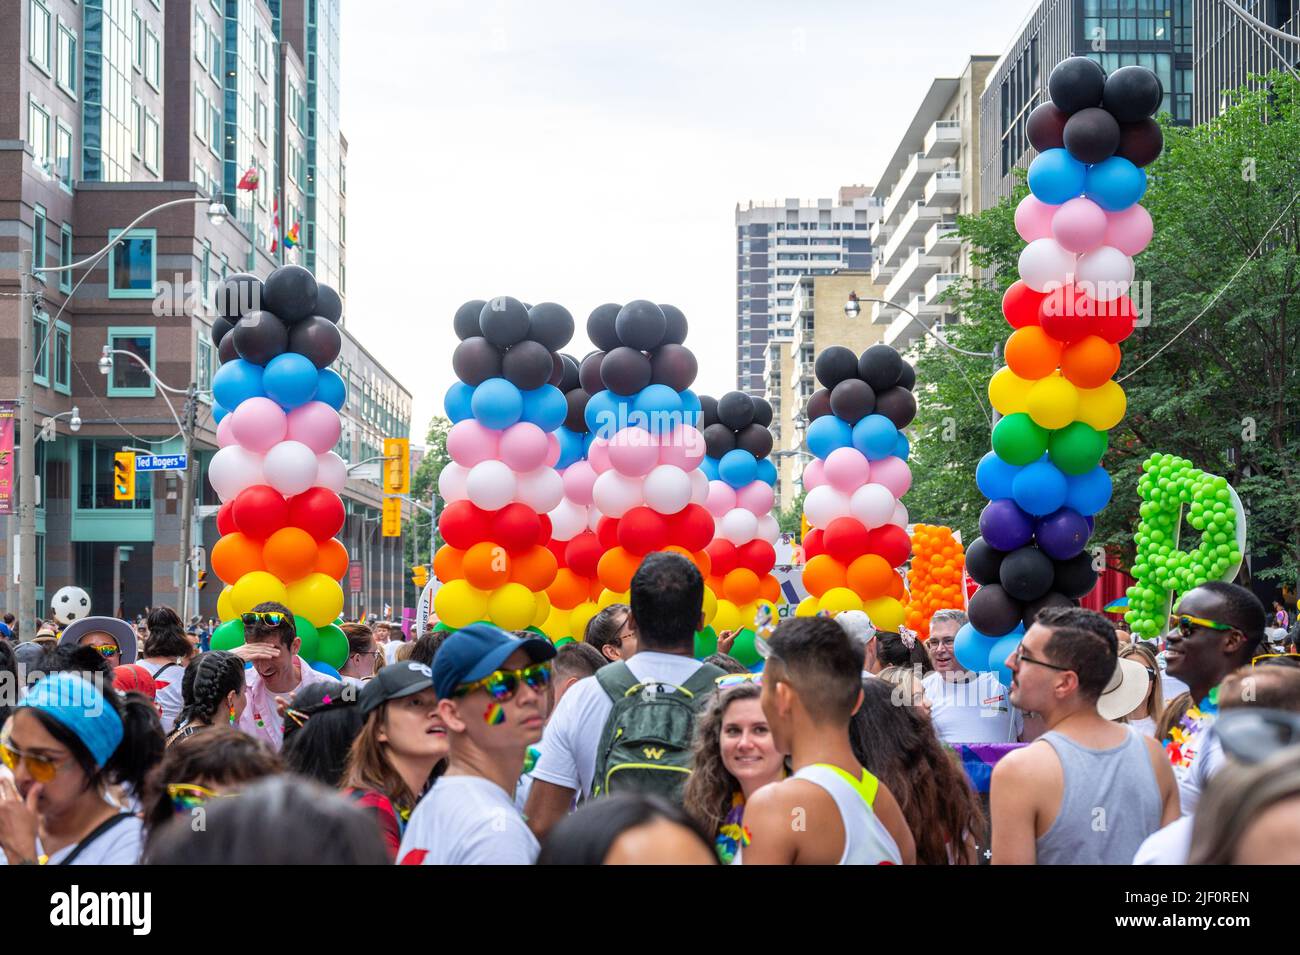 Crowd of people marching in Bloor Street during Pride Parade. They are holding columns of balloons with rainbow colors. Stock Photo